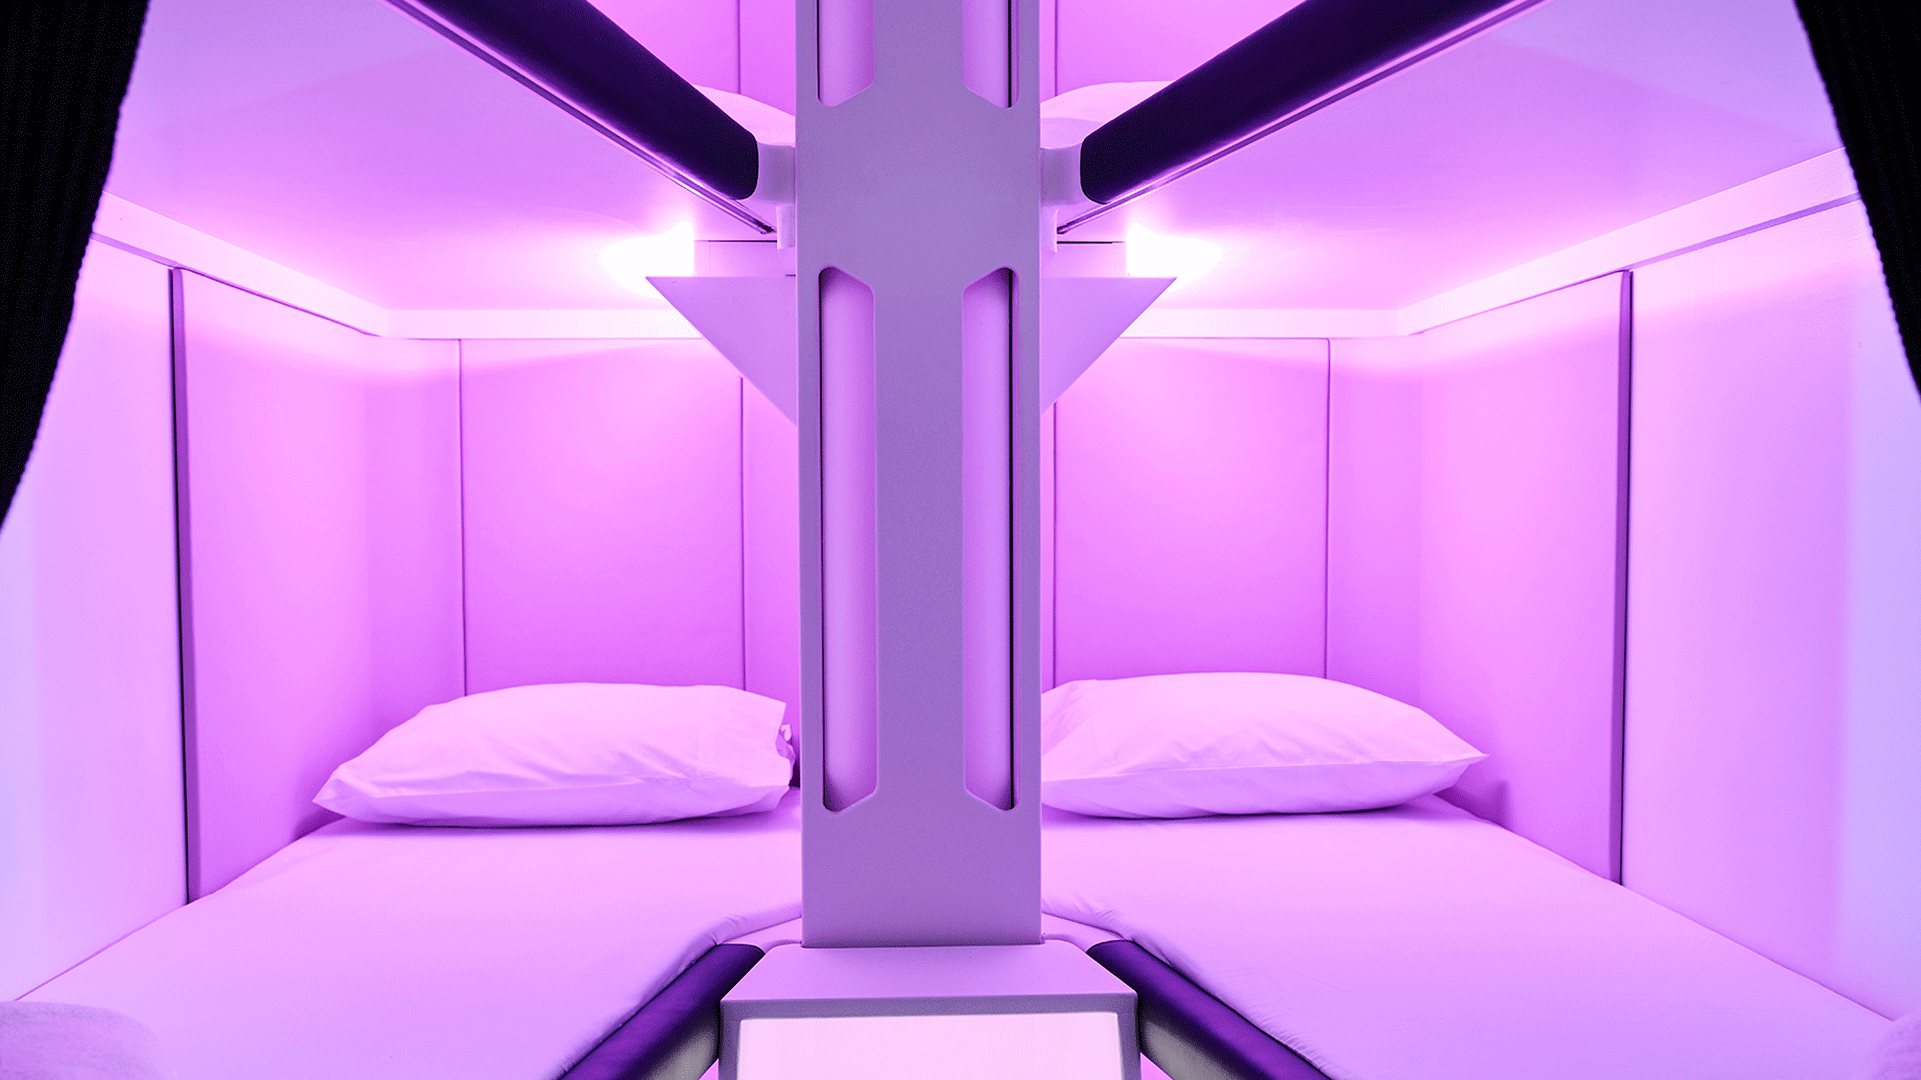 We tried 'Skynest', Air New Zealand's long-haul bunk beds where you can snooze in 4-hour slots